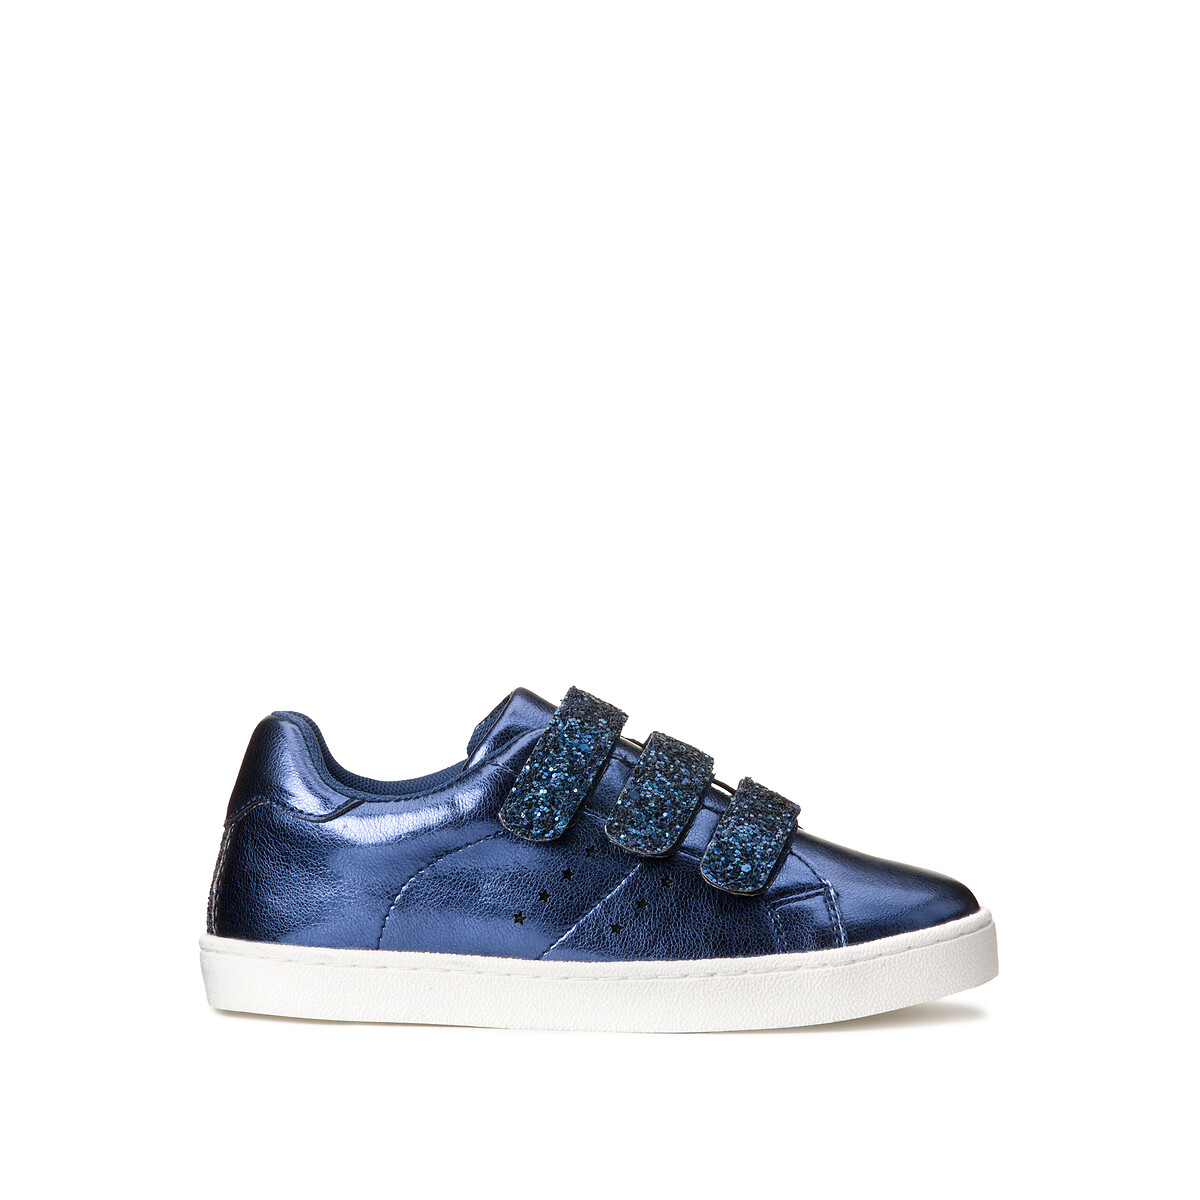 Kids Glittery Low Top Trainers with Touch ’n’ Close Fastening